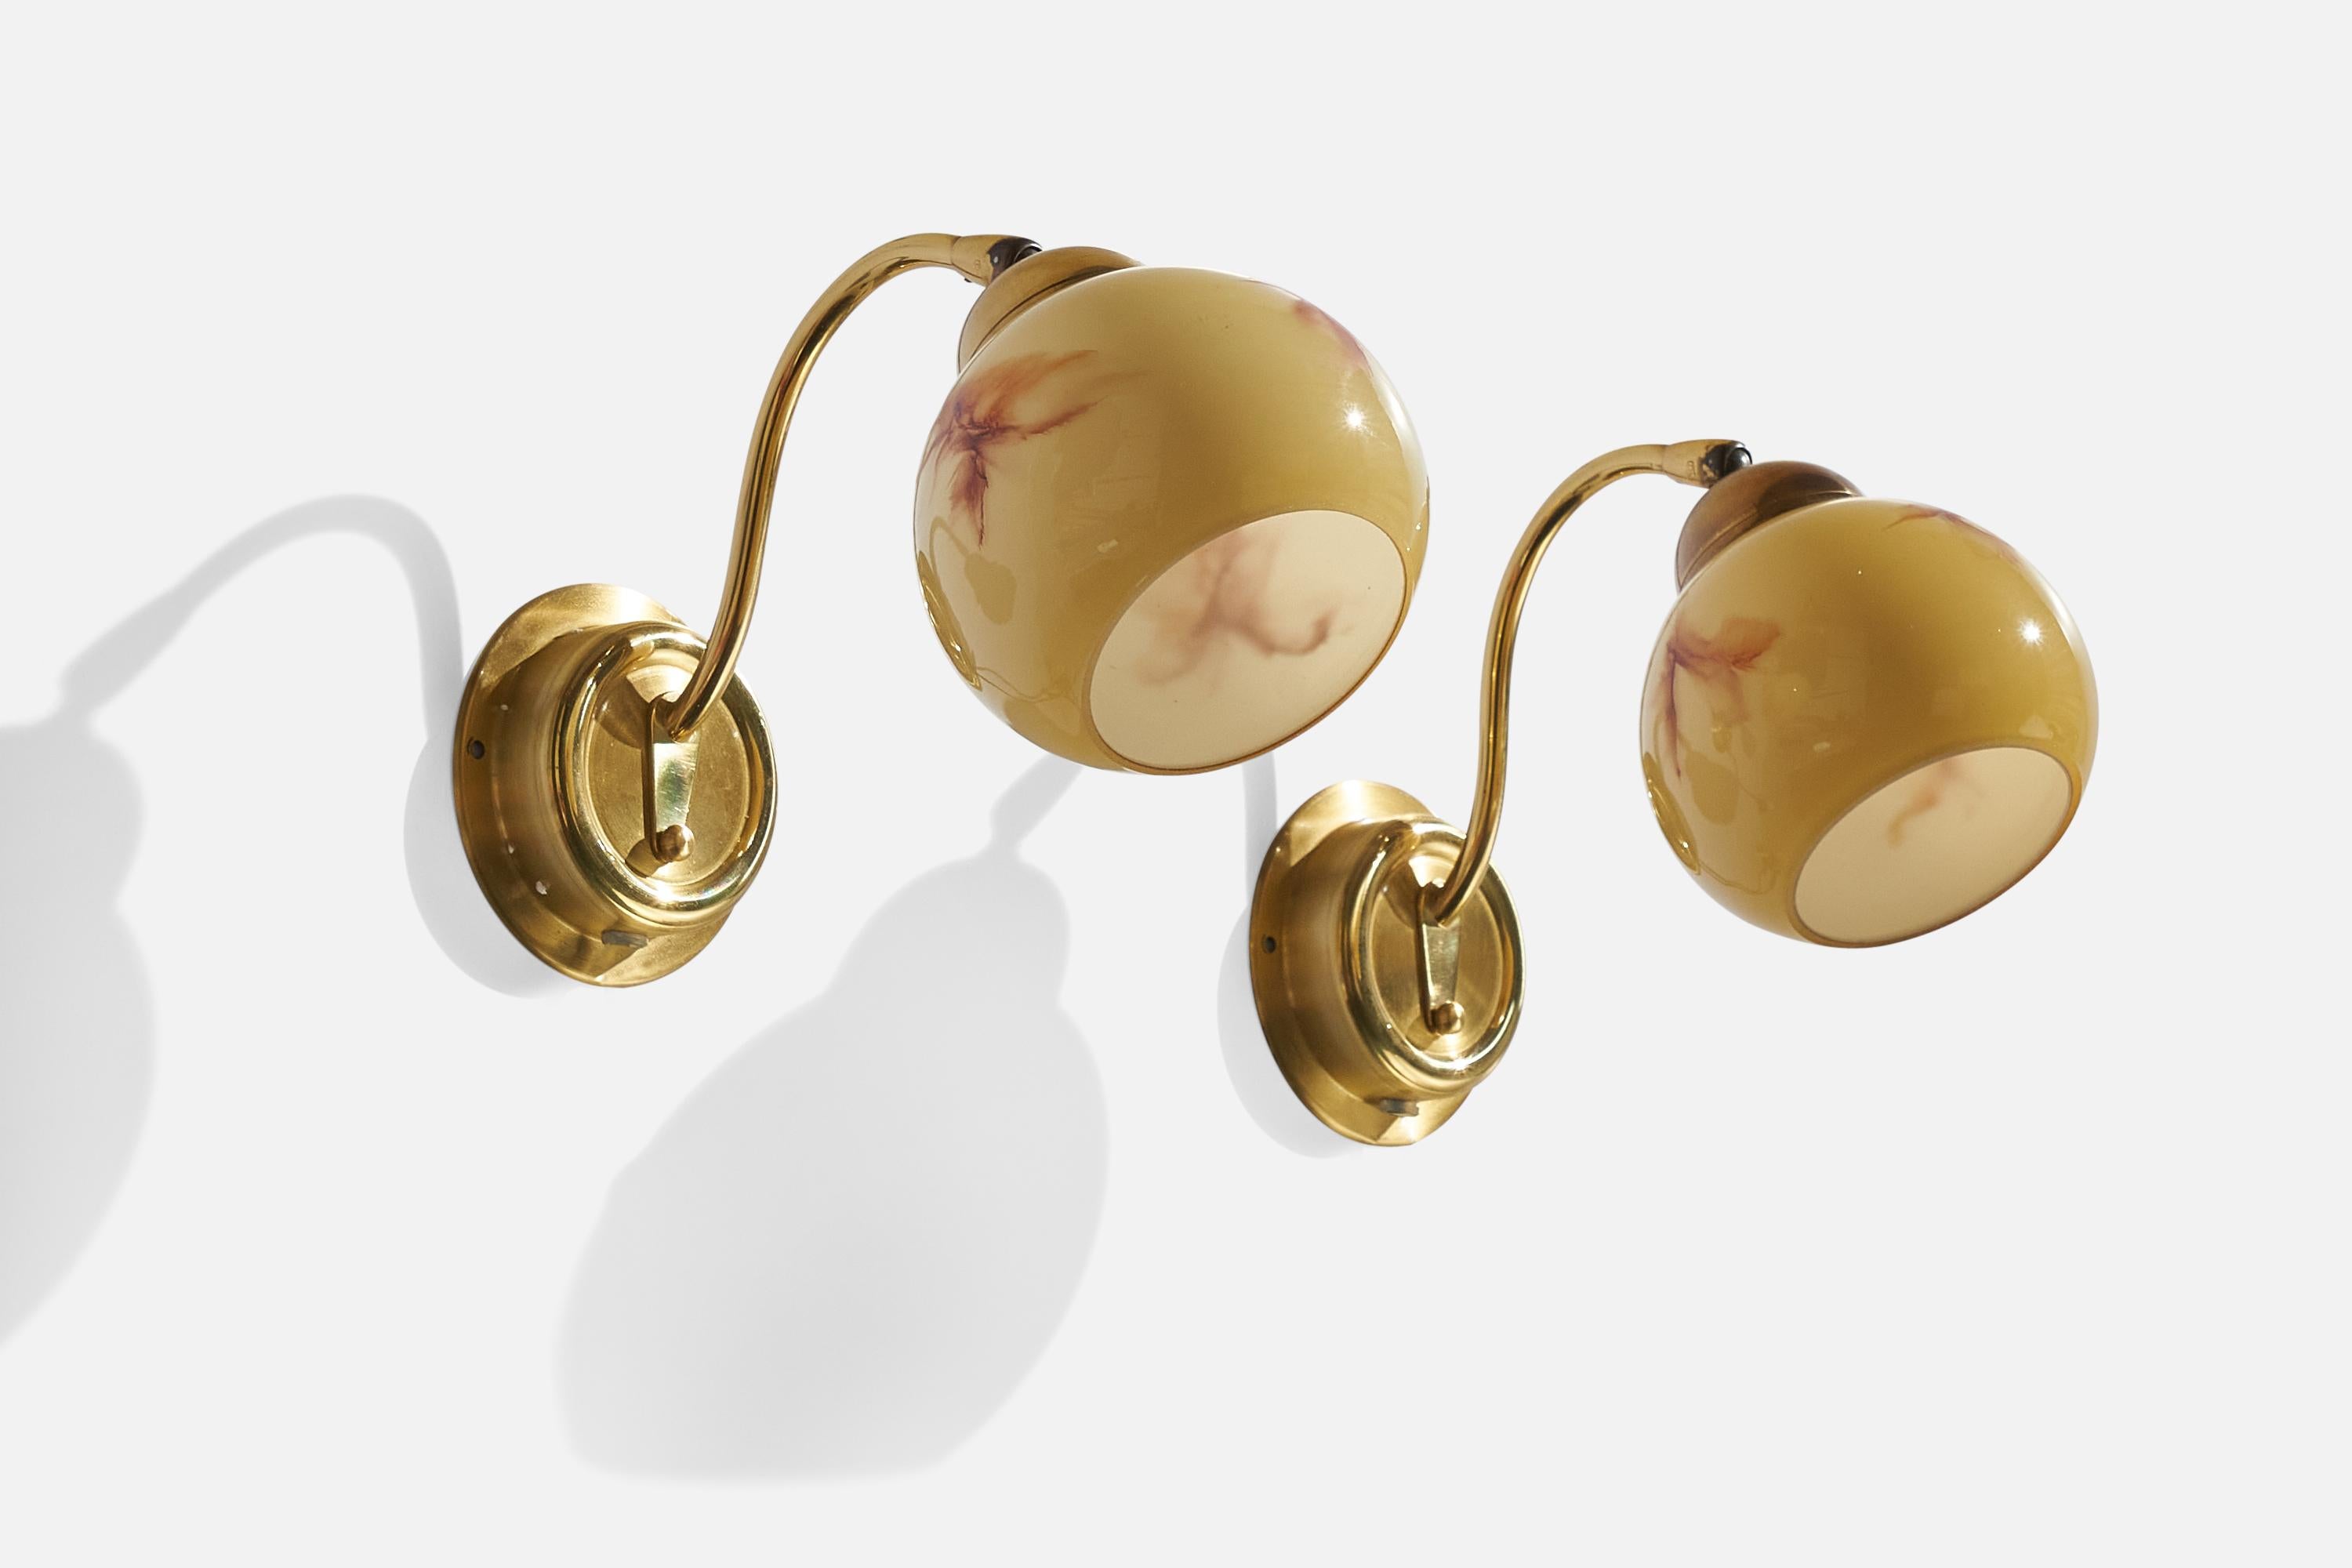 A pair of brass and beige glass wall lights designed and produced by EWÅ Värnamo, Sweden, 1970s.

Overall Dimensions (inches): 6.5”  H x 5” W x 8.5”  D
Back Plate Dimensions (inches): 4.25”  H x 1.1” D
Bulb Specifications: E-26 Bulb
Number of